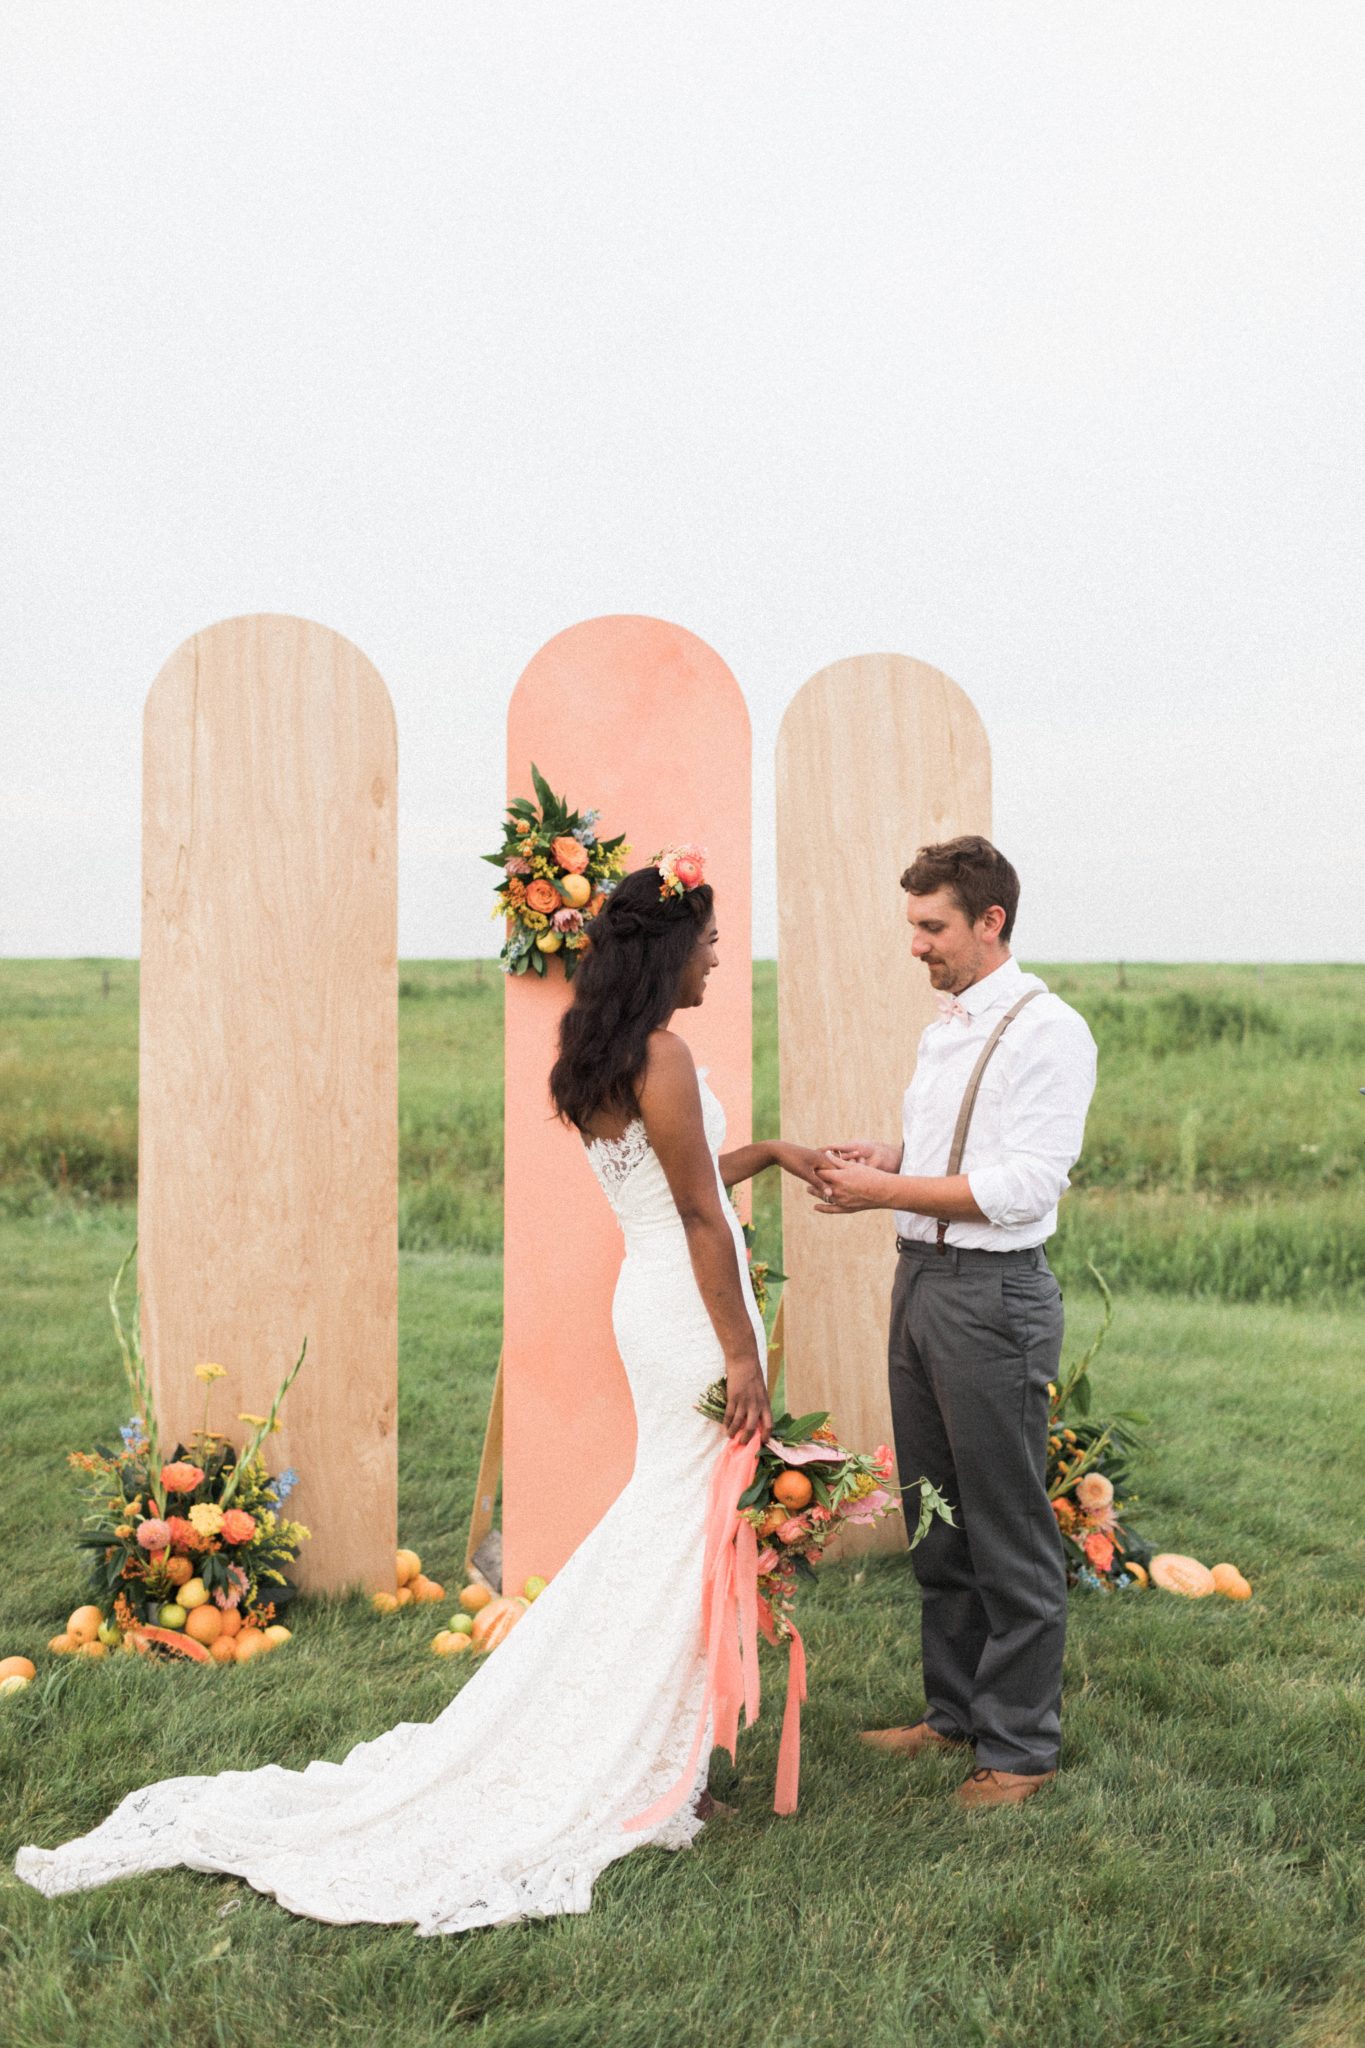 Garden inspired wedding with ceremony backdrop panels at The Gathered an Alberta wedding venue